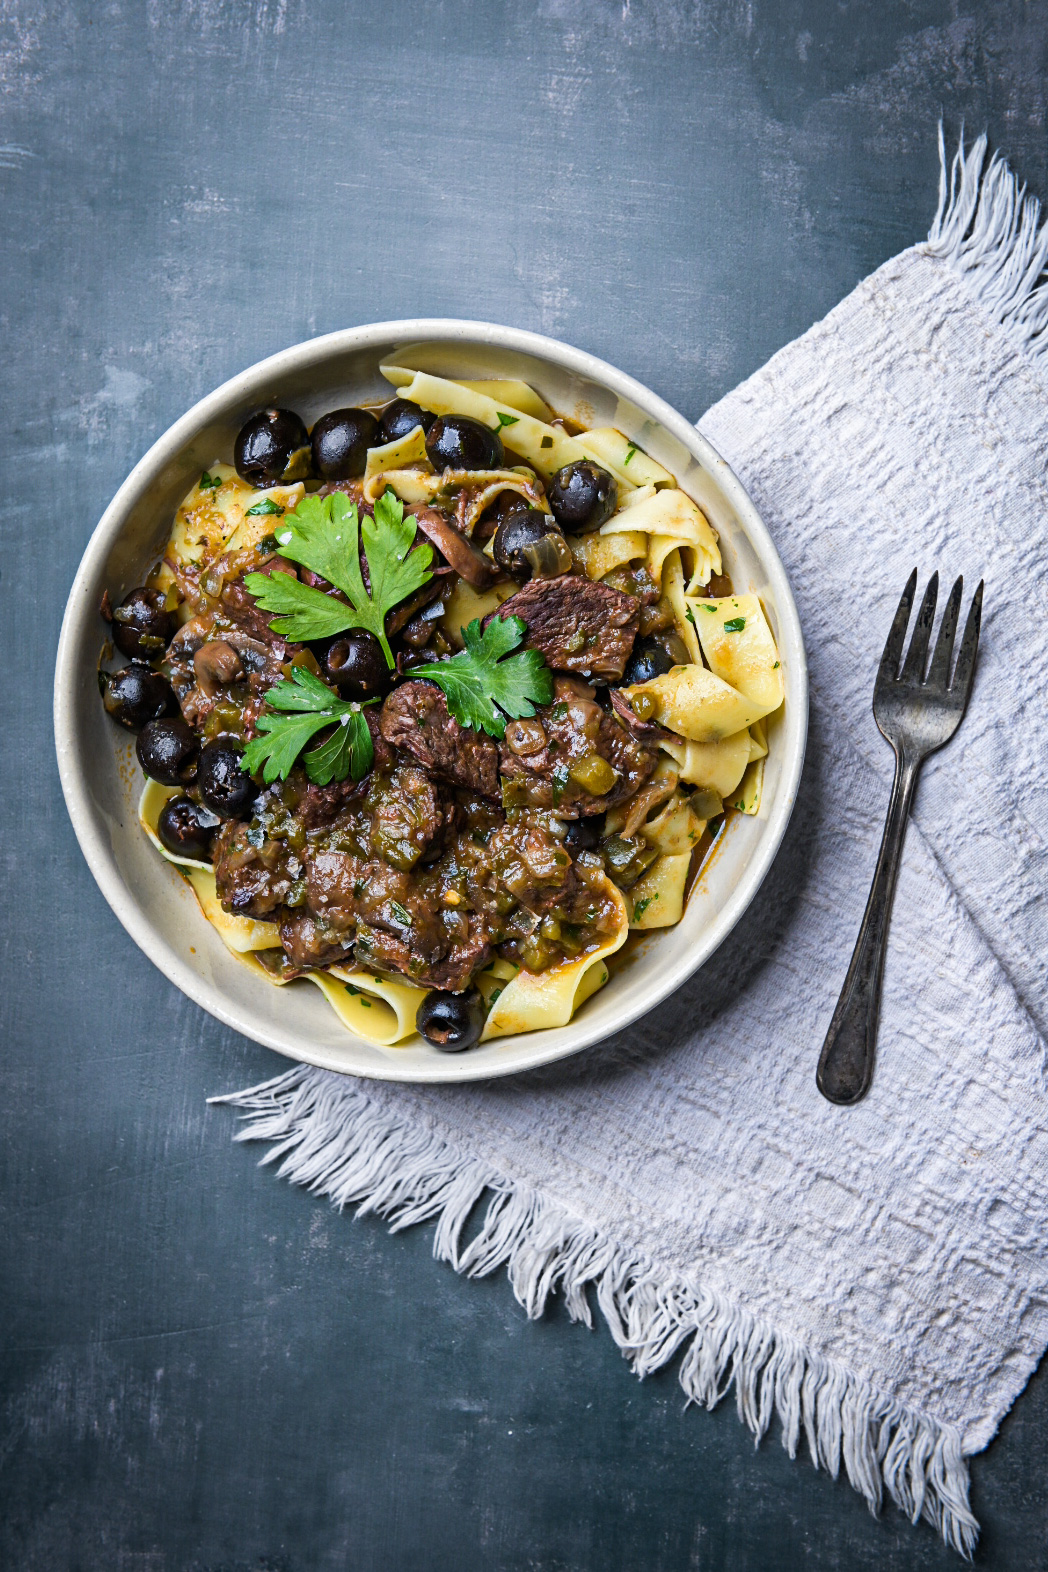 Buttered pappardelle with stewed beef and mushrooms